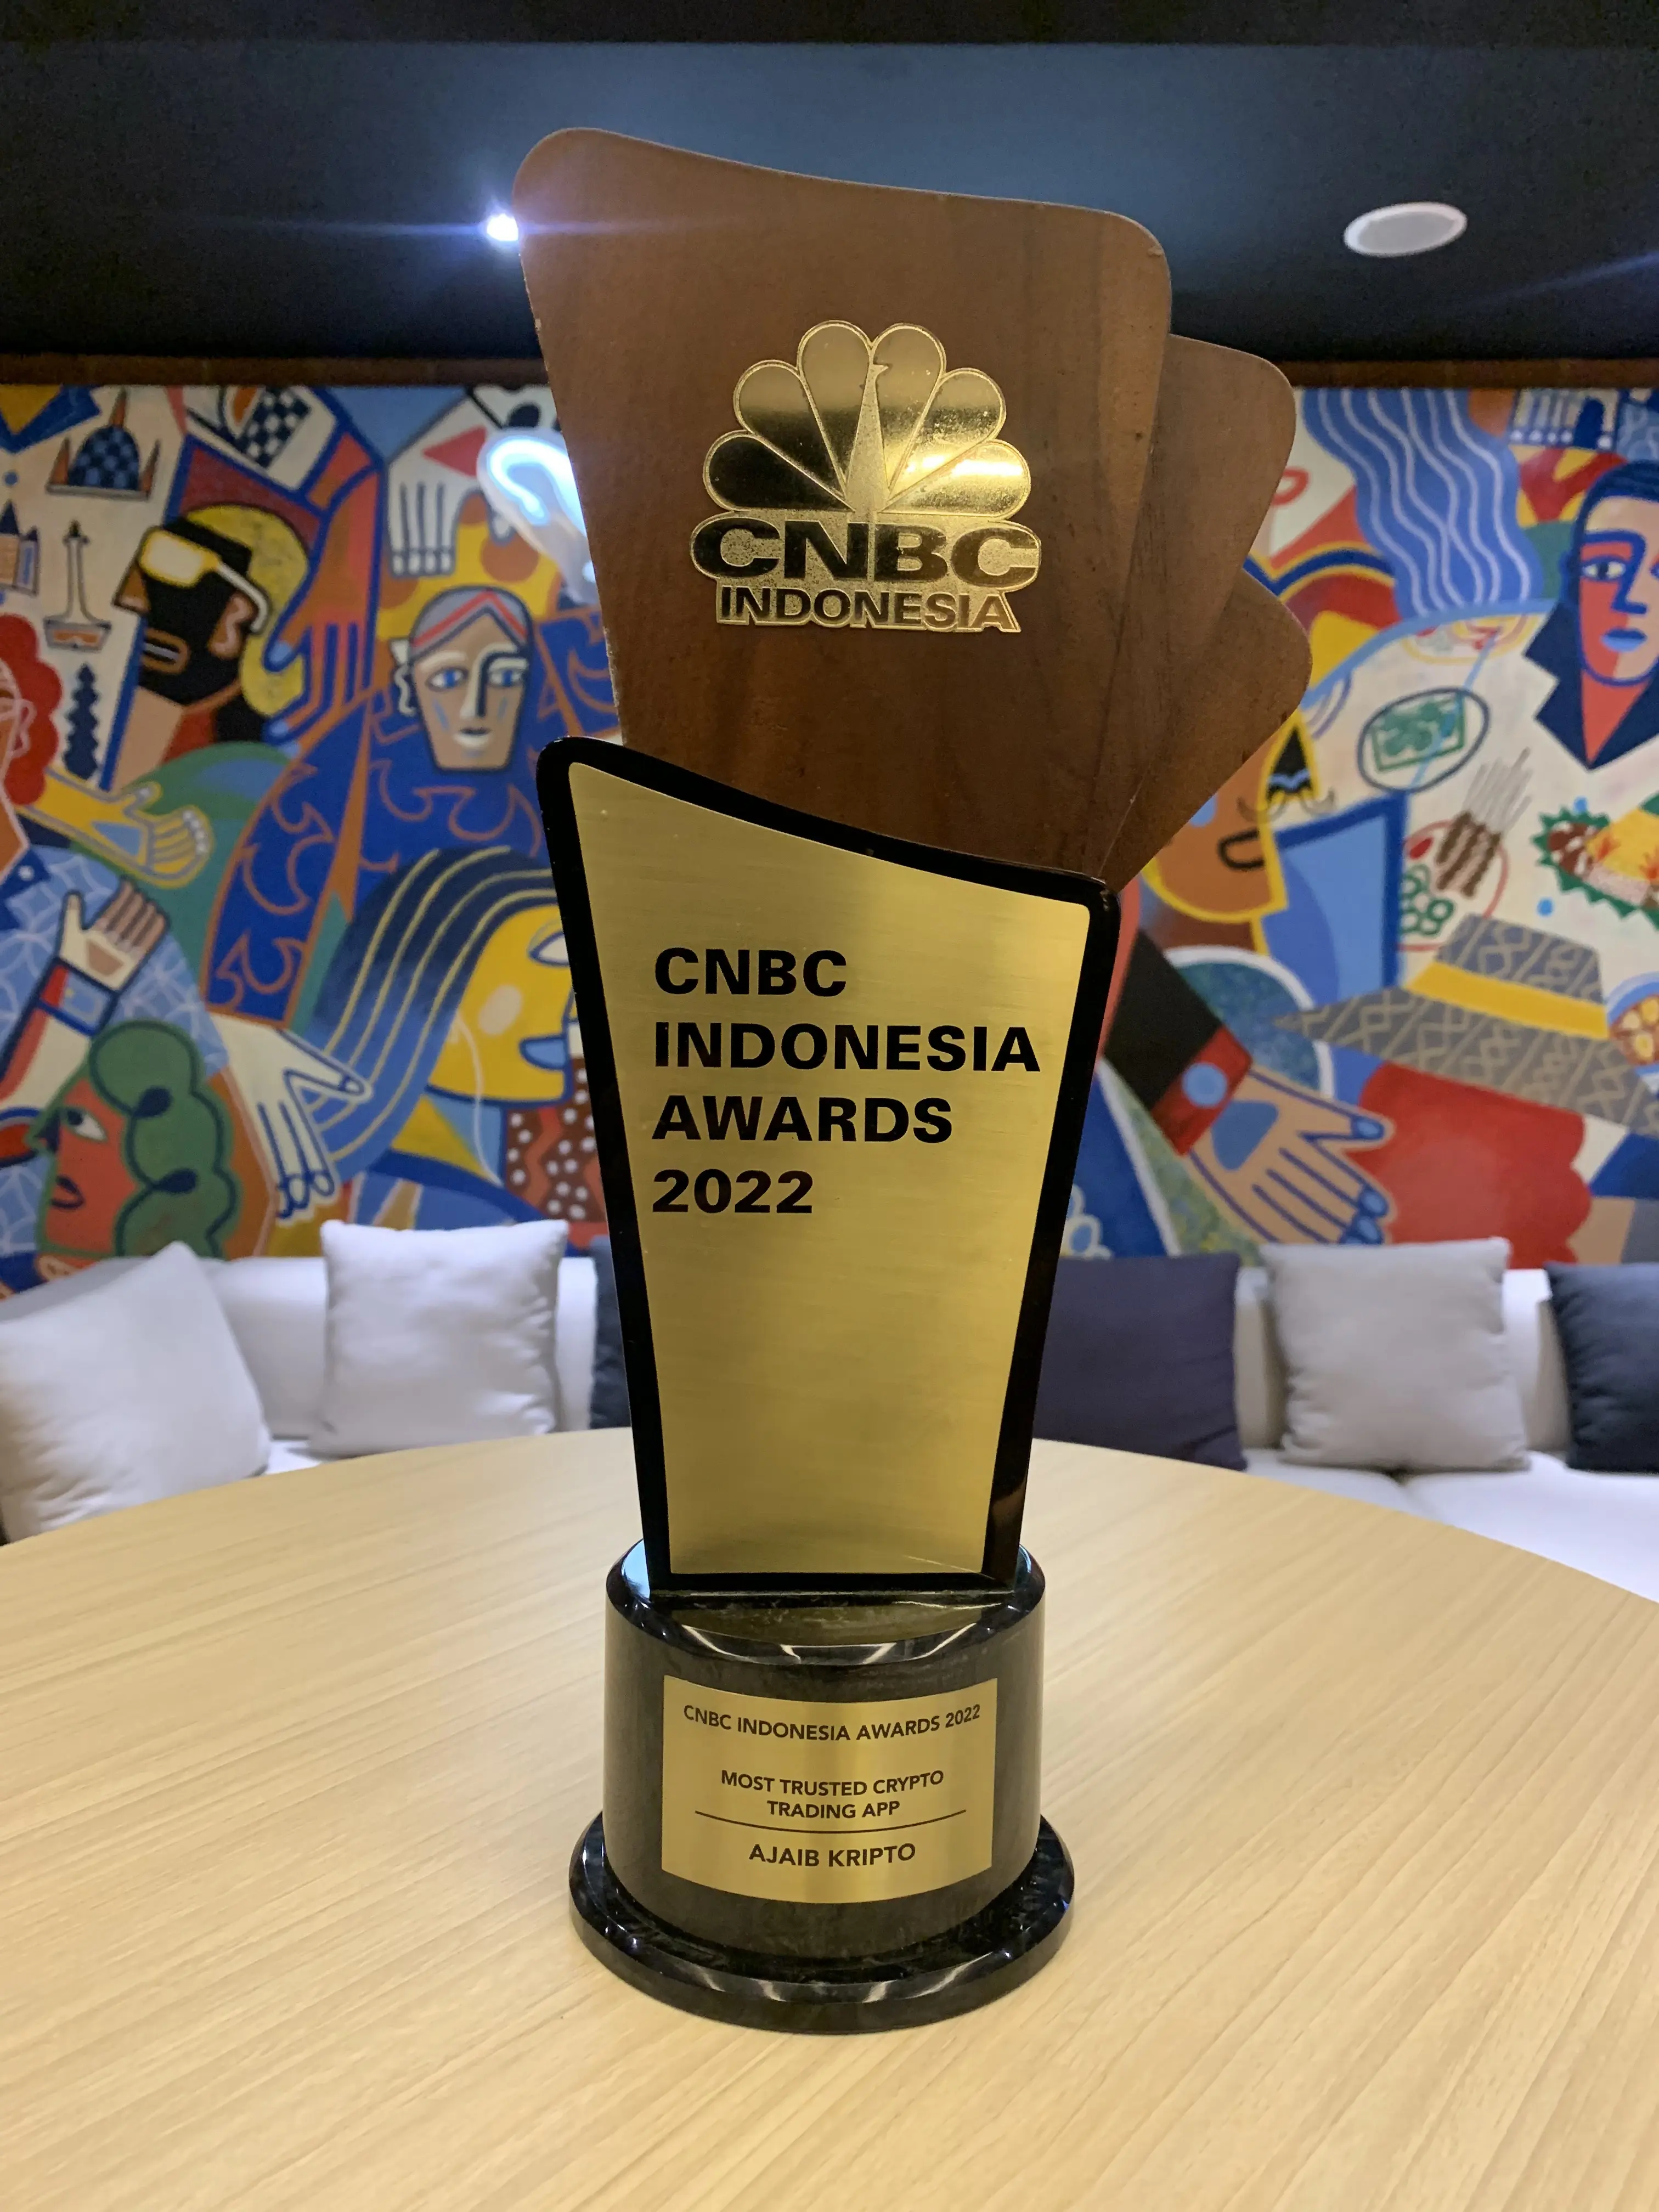 Ajaib Kripto - Most Trusted Crypto Trading App CNBC Indonesia (2022)